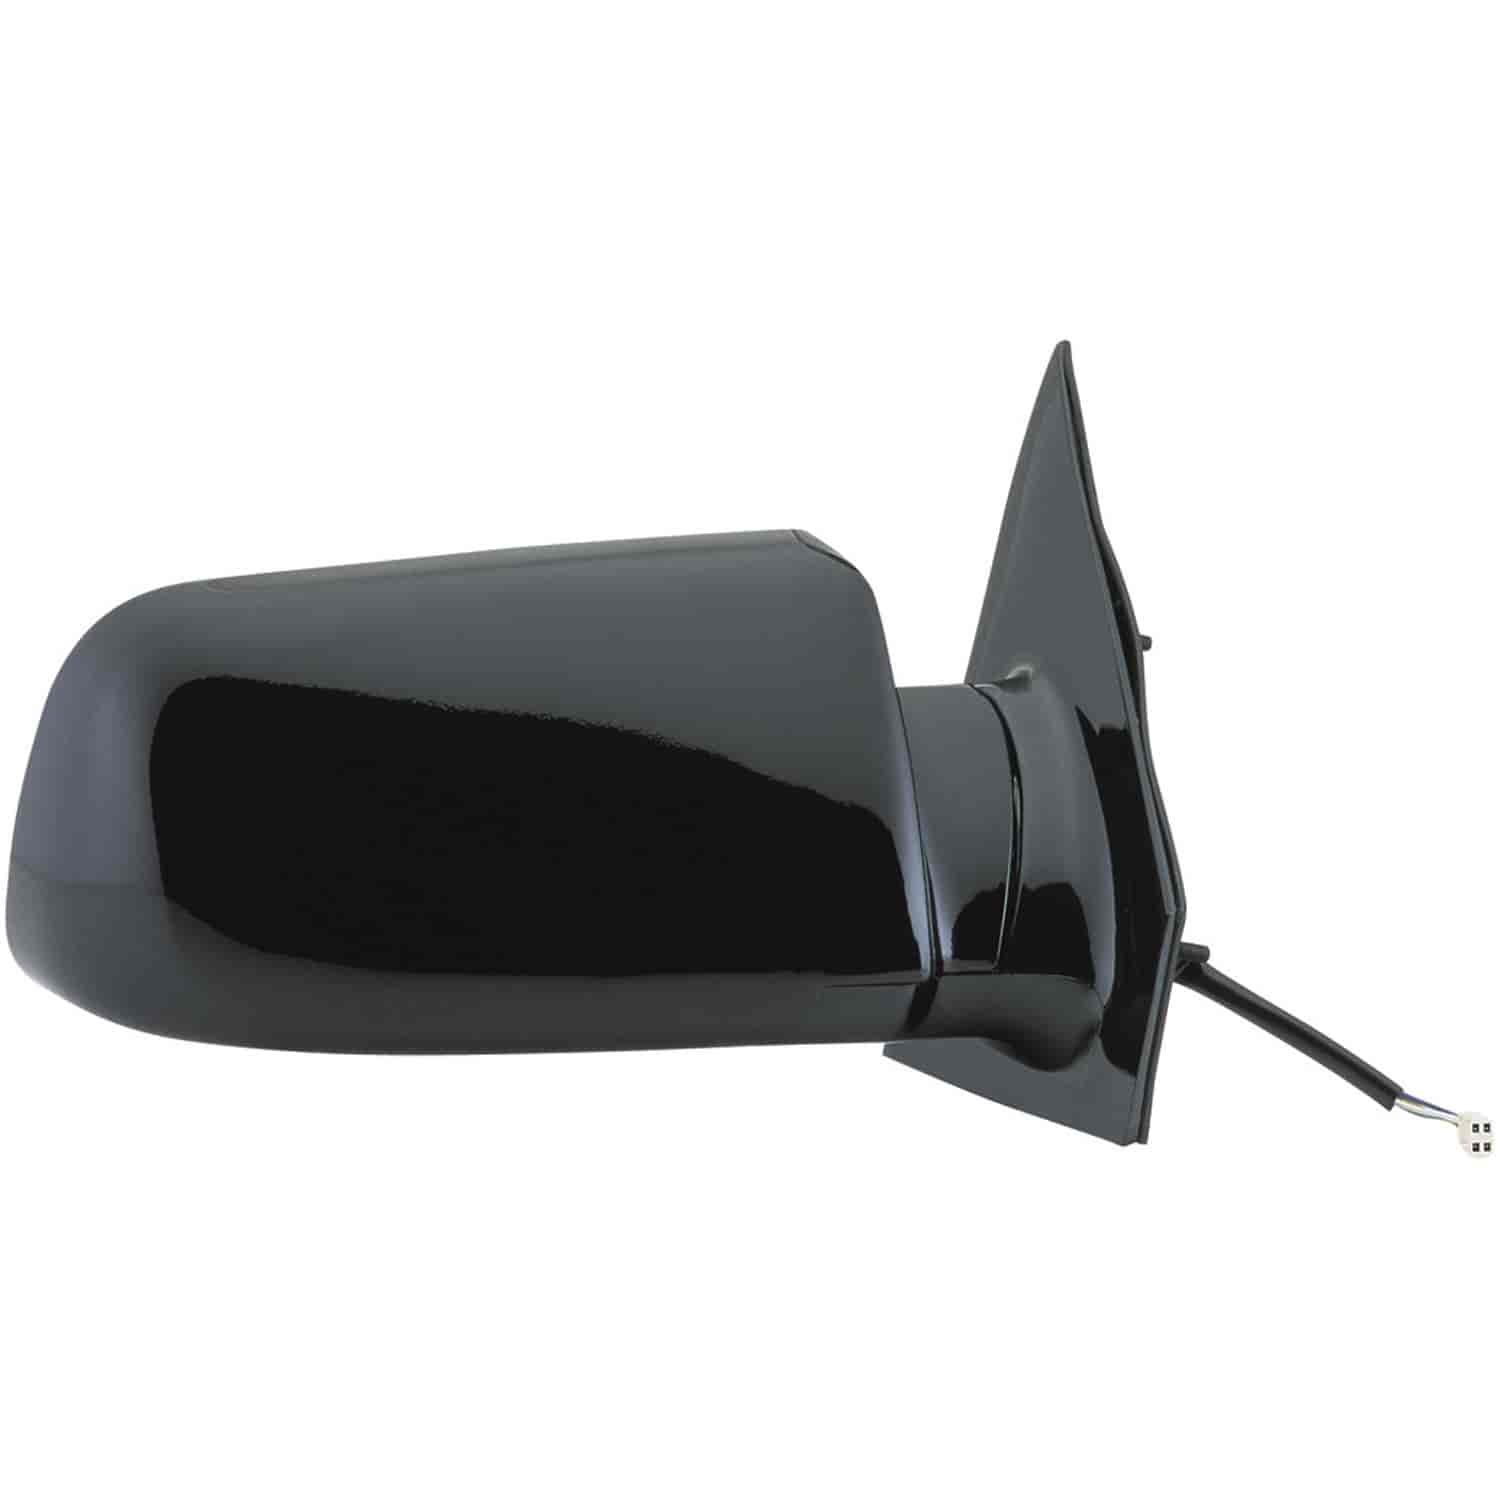 OEM Style Replacement mirror for 99 Chevy Astro Van GMC Safari Van passenger side mirror tested to f